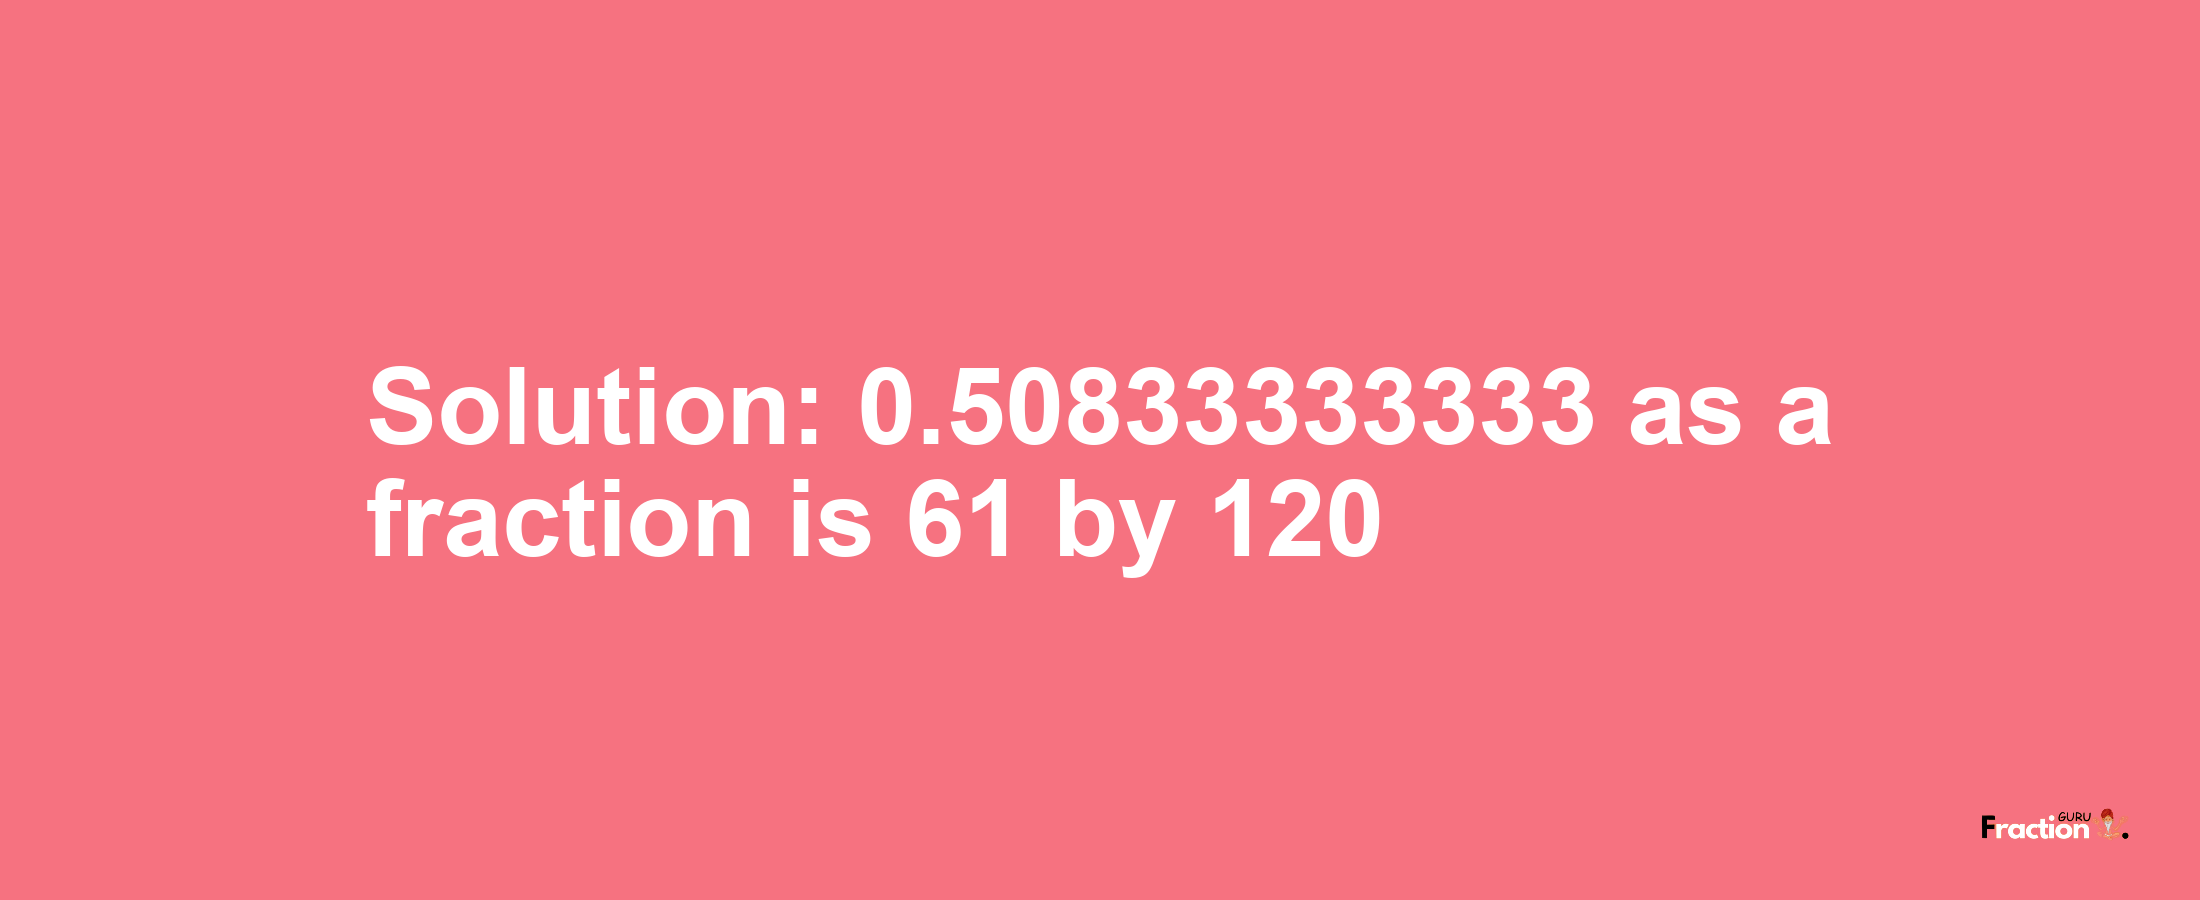 Solution:0.50833333333 as a fraction is 61/120